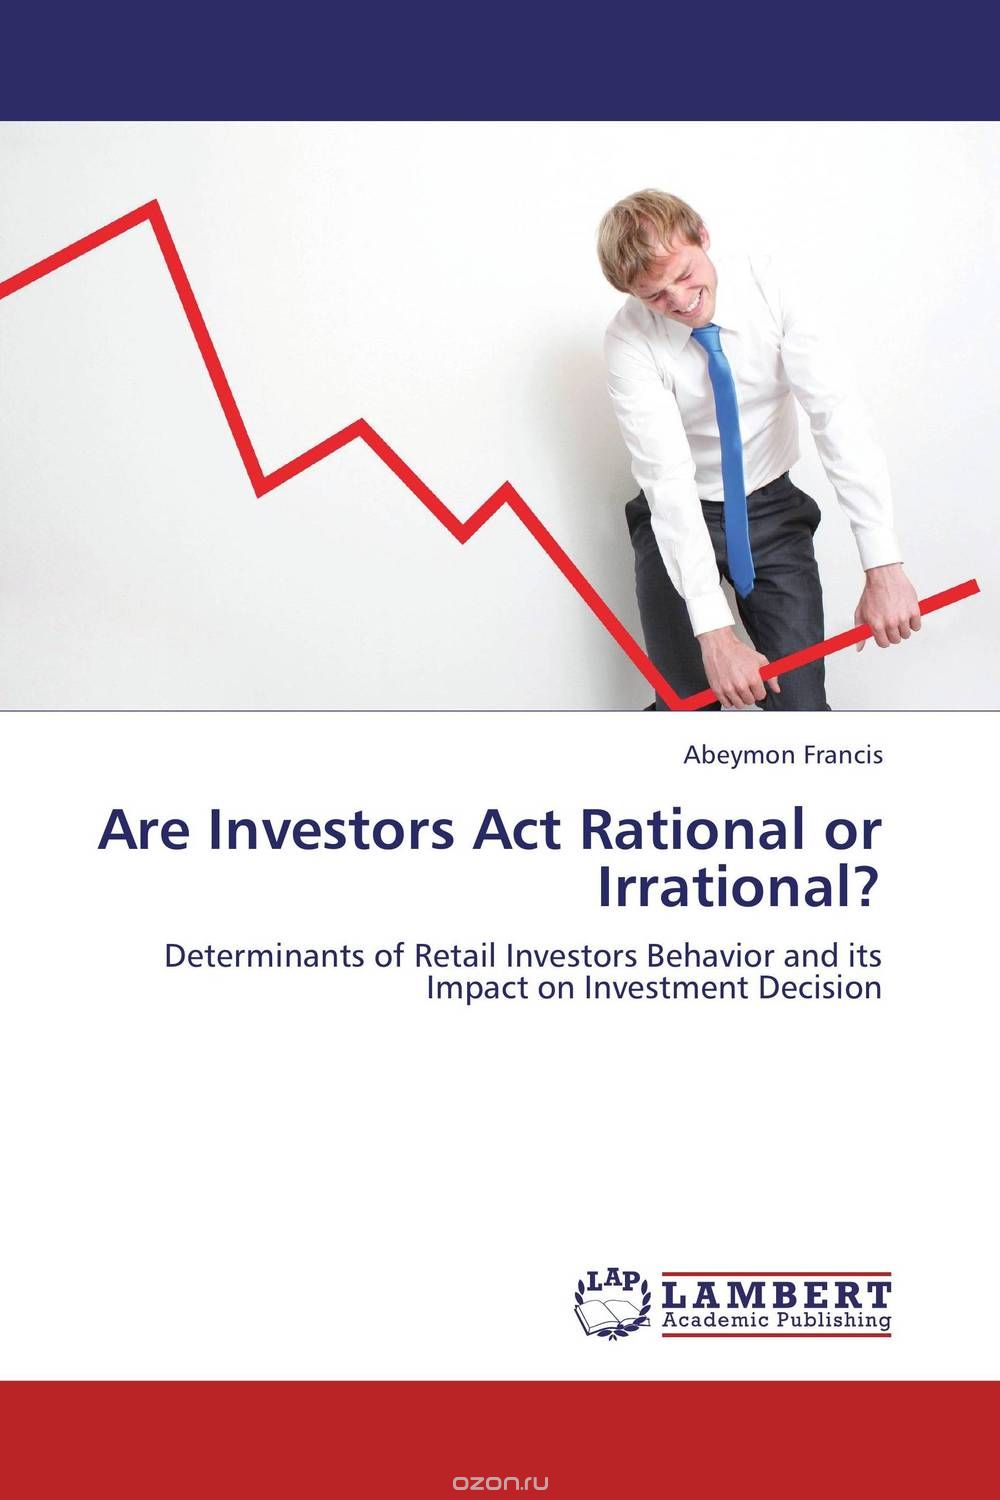 Are Investors Act Rational or Irrational?